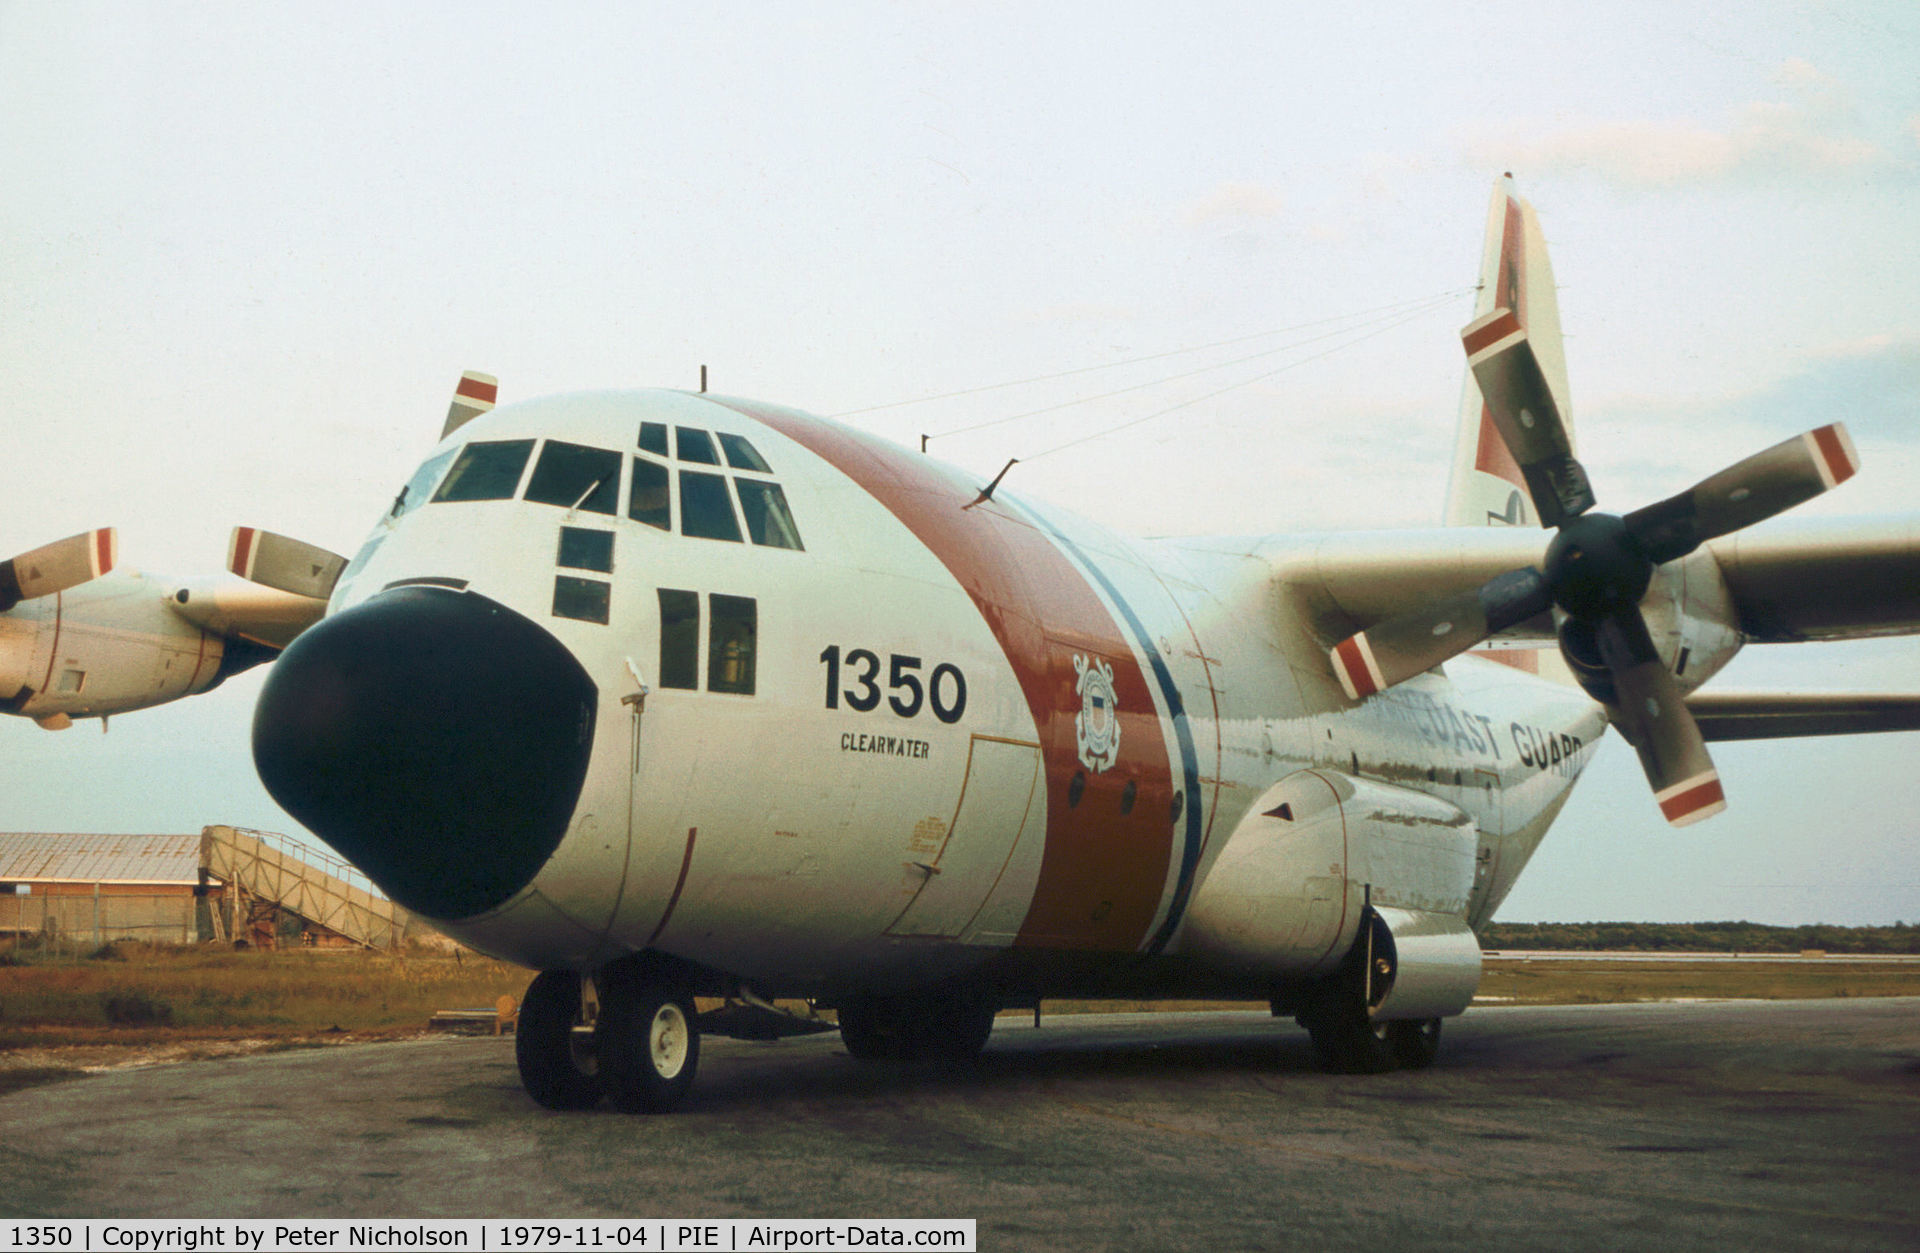 1350, 1962 Lockheed HC-130B Hercules C/N 282-3763, Another view of HC-130B Hercules 1350 at USCG Station Clearwater in November 1979.